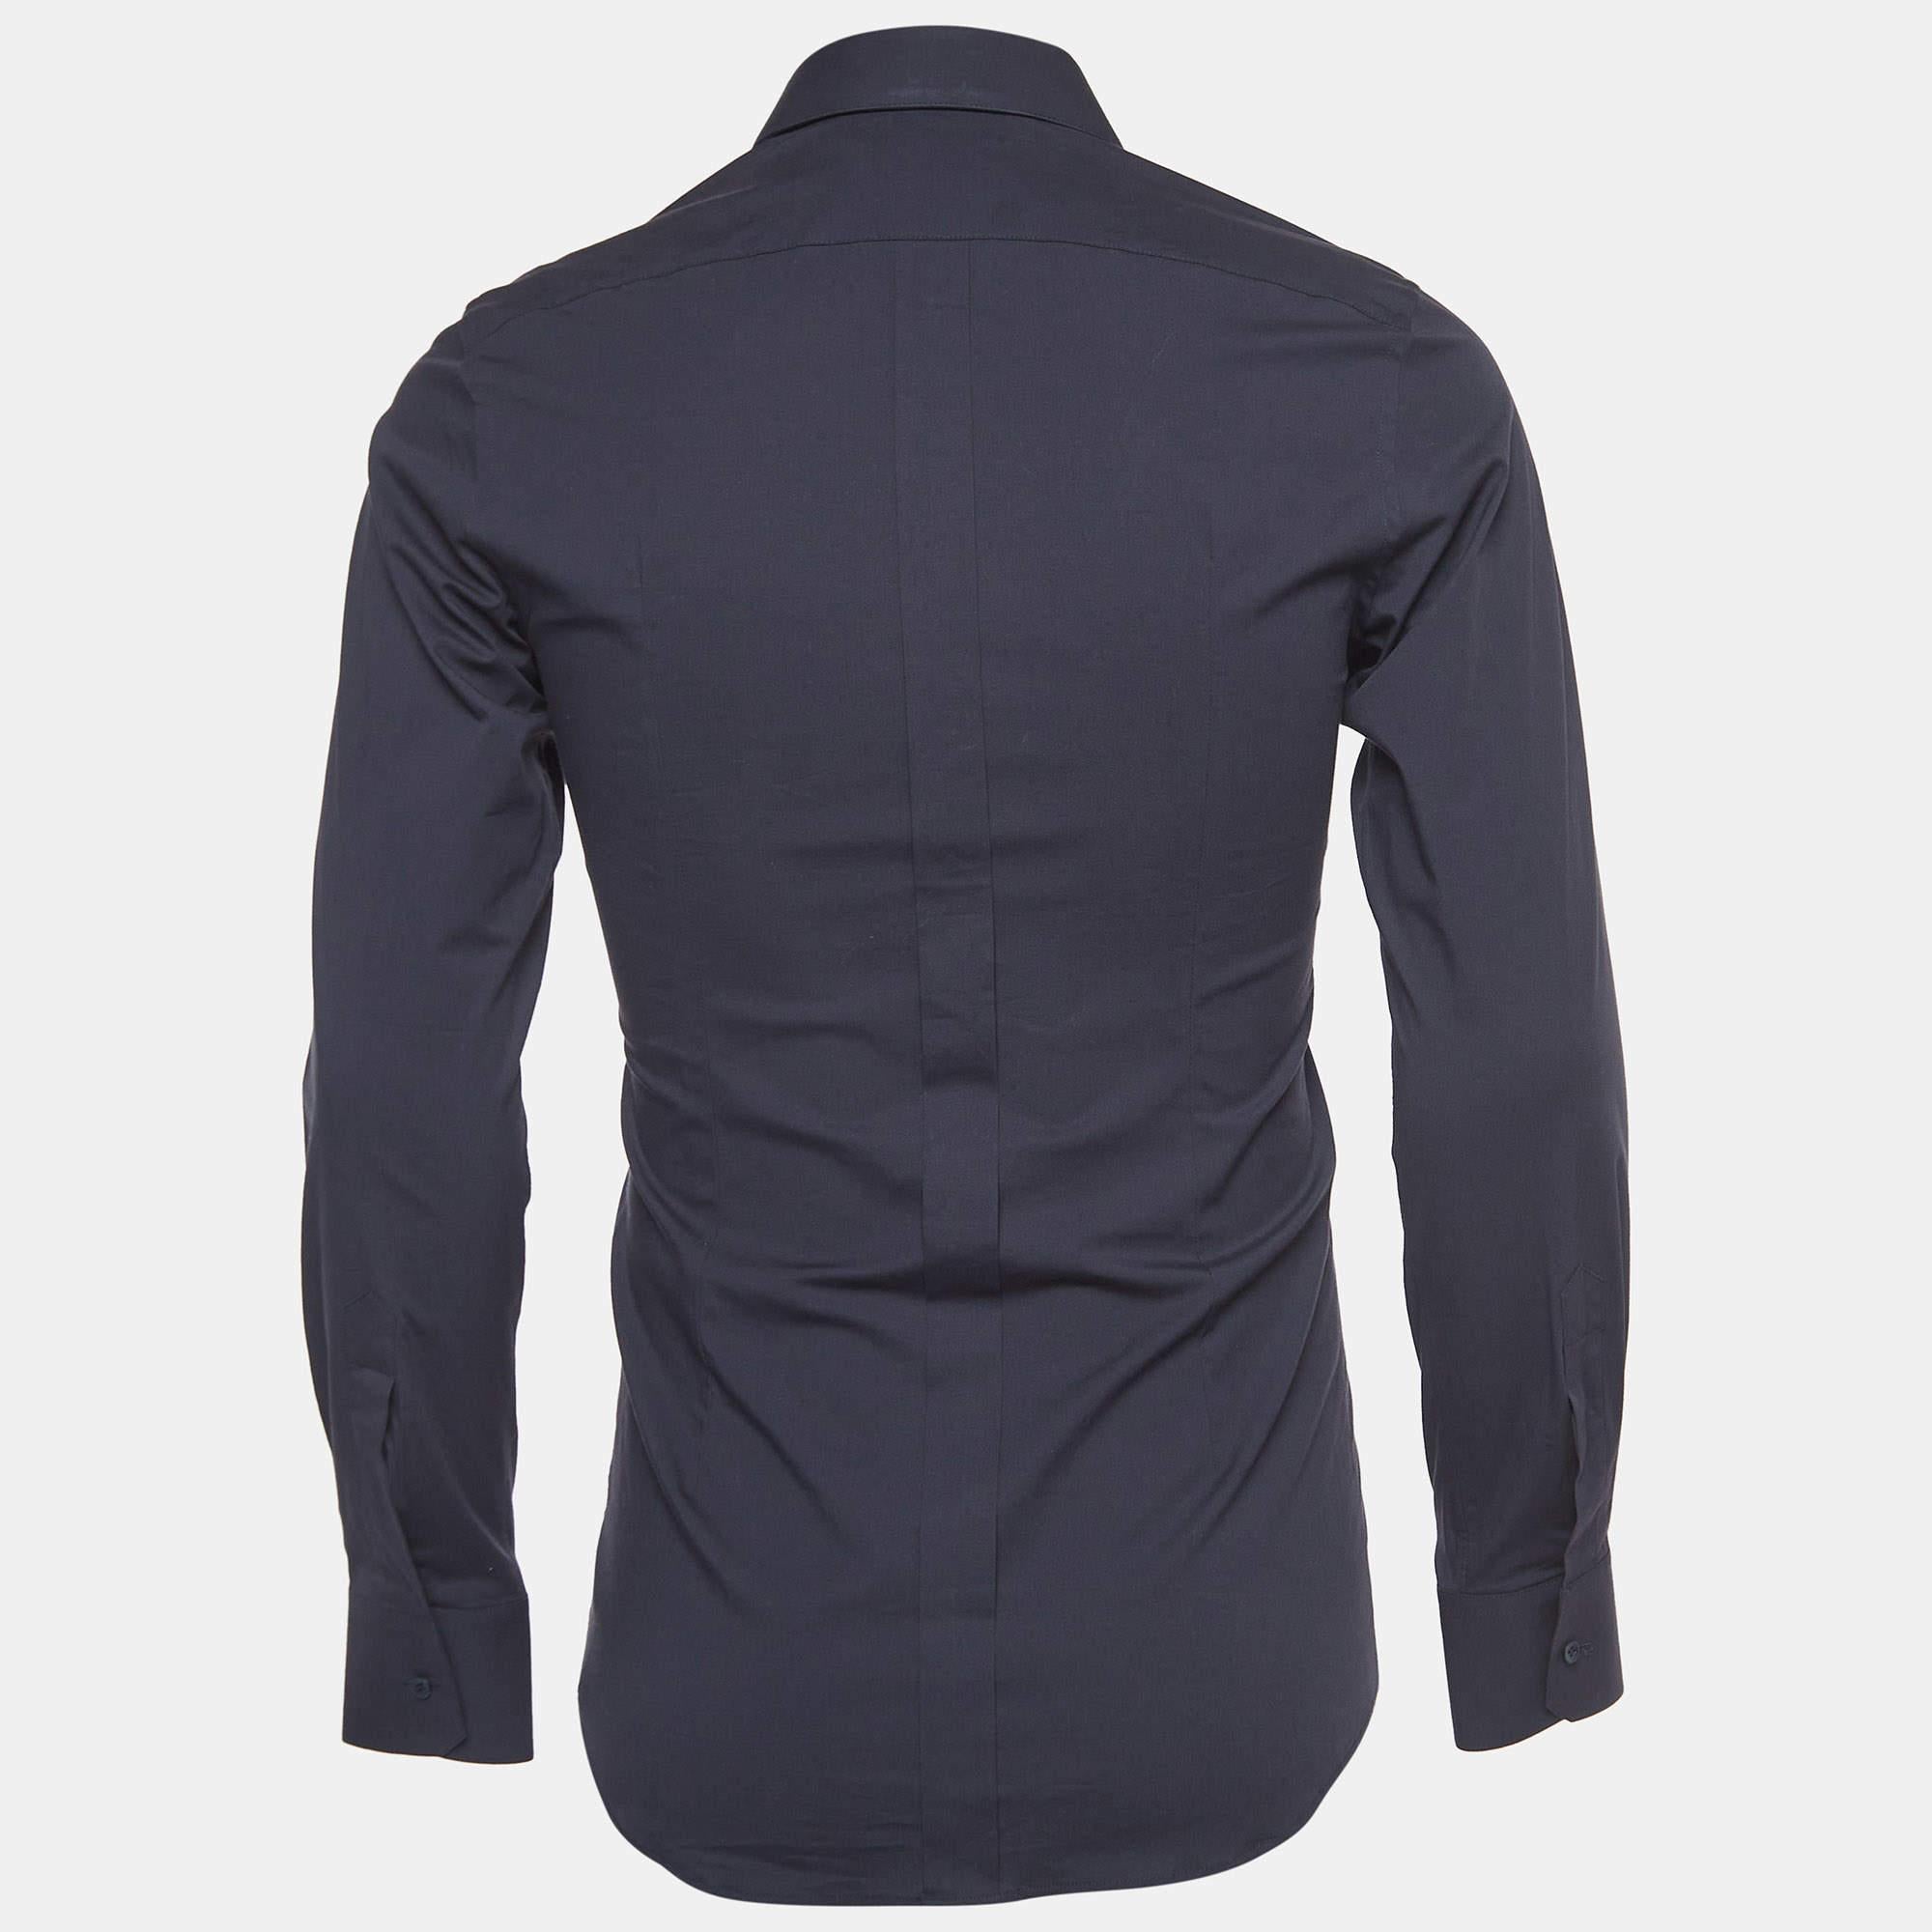 How fabulous does this designer shirt look! It is made of fine materials and features a fitted silhouette. Pair it with pants and loafers for a cool ensemble.

